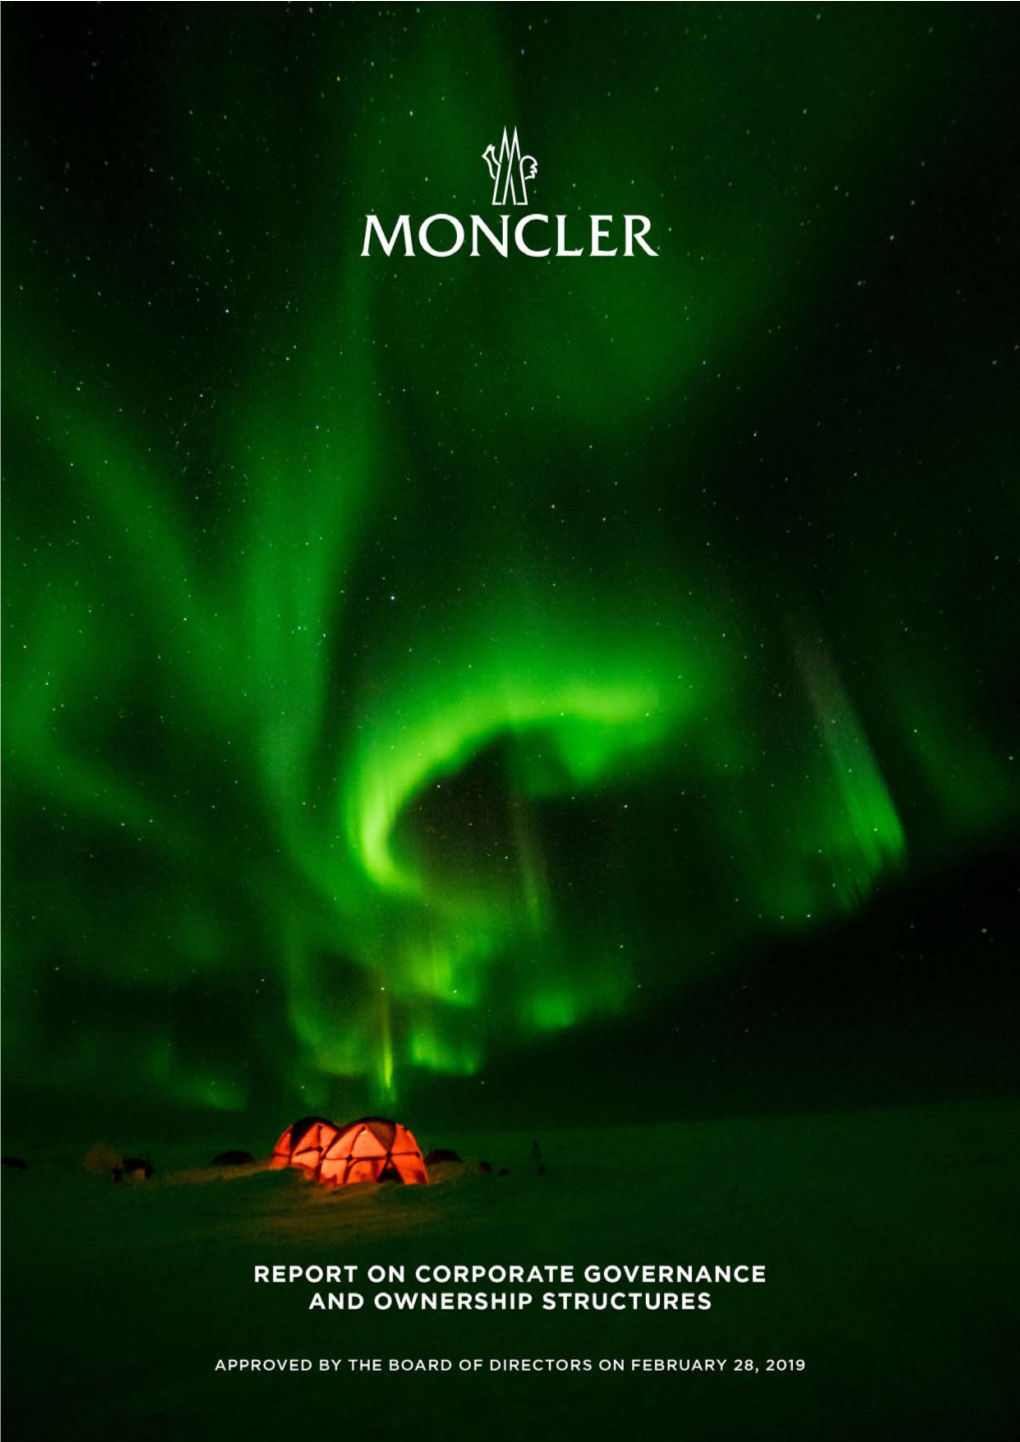 Moncler S.P.A. Report on Corporate Governance and Ownership Structures 2